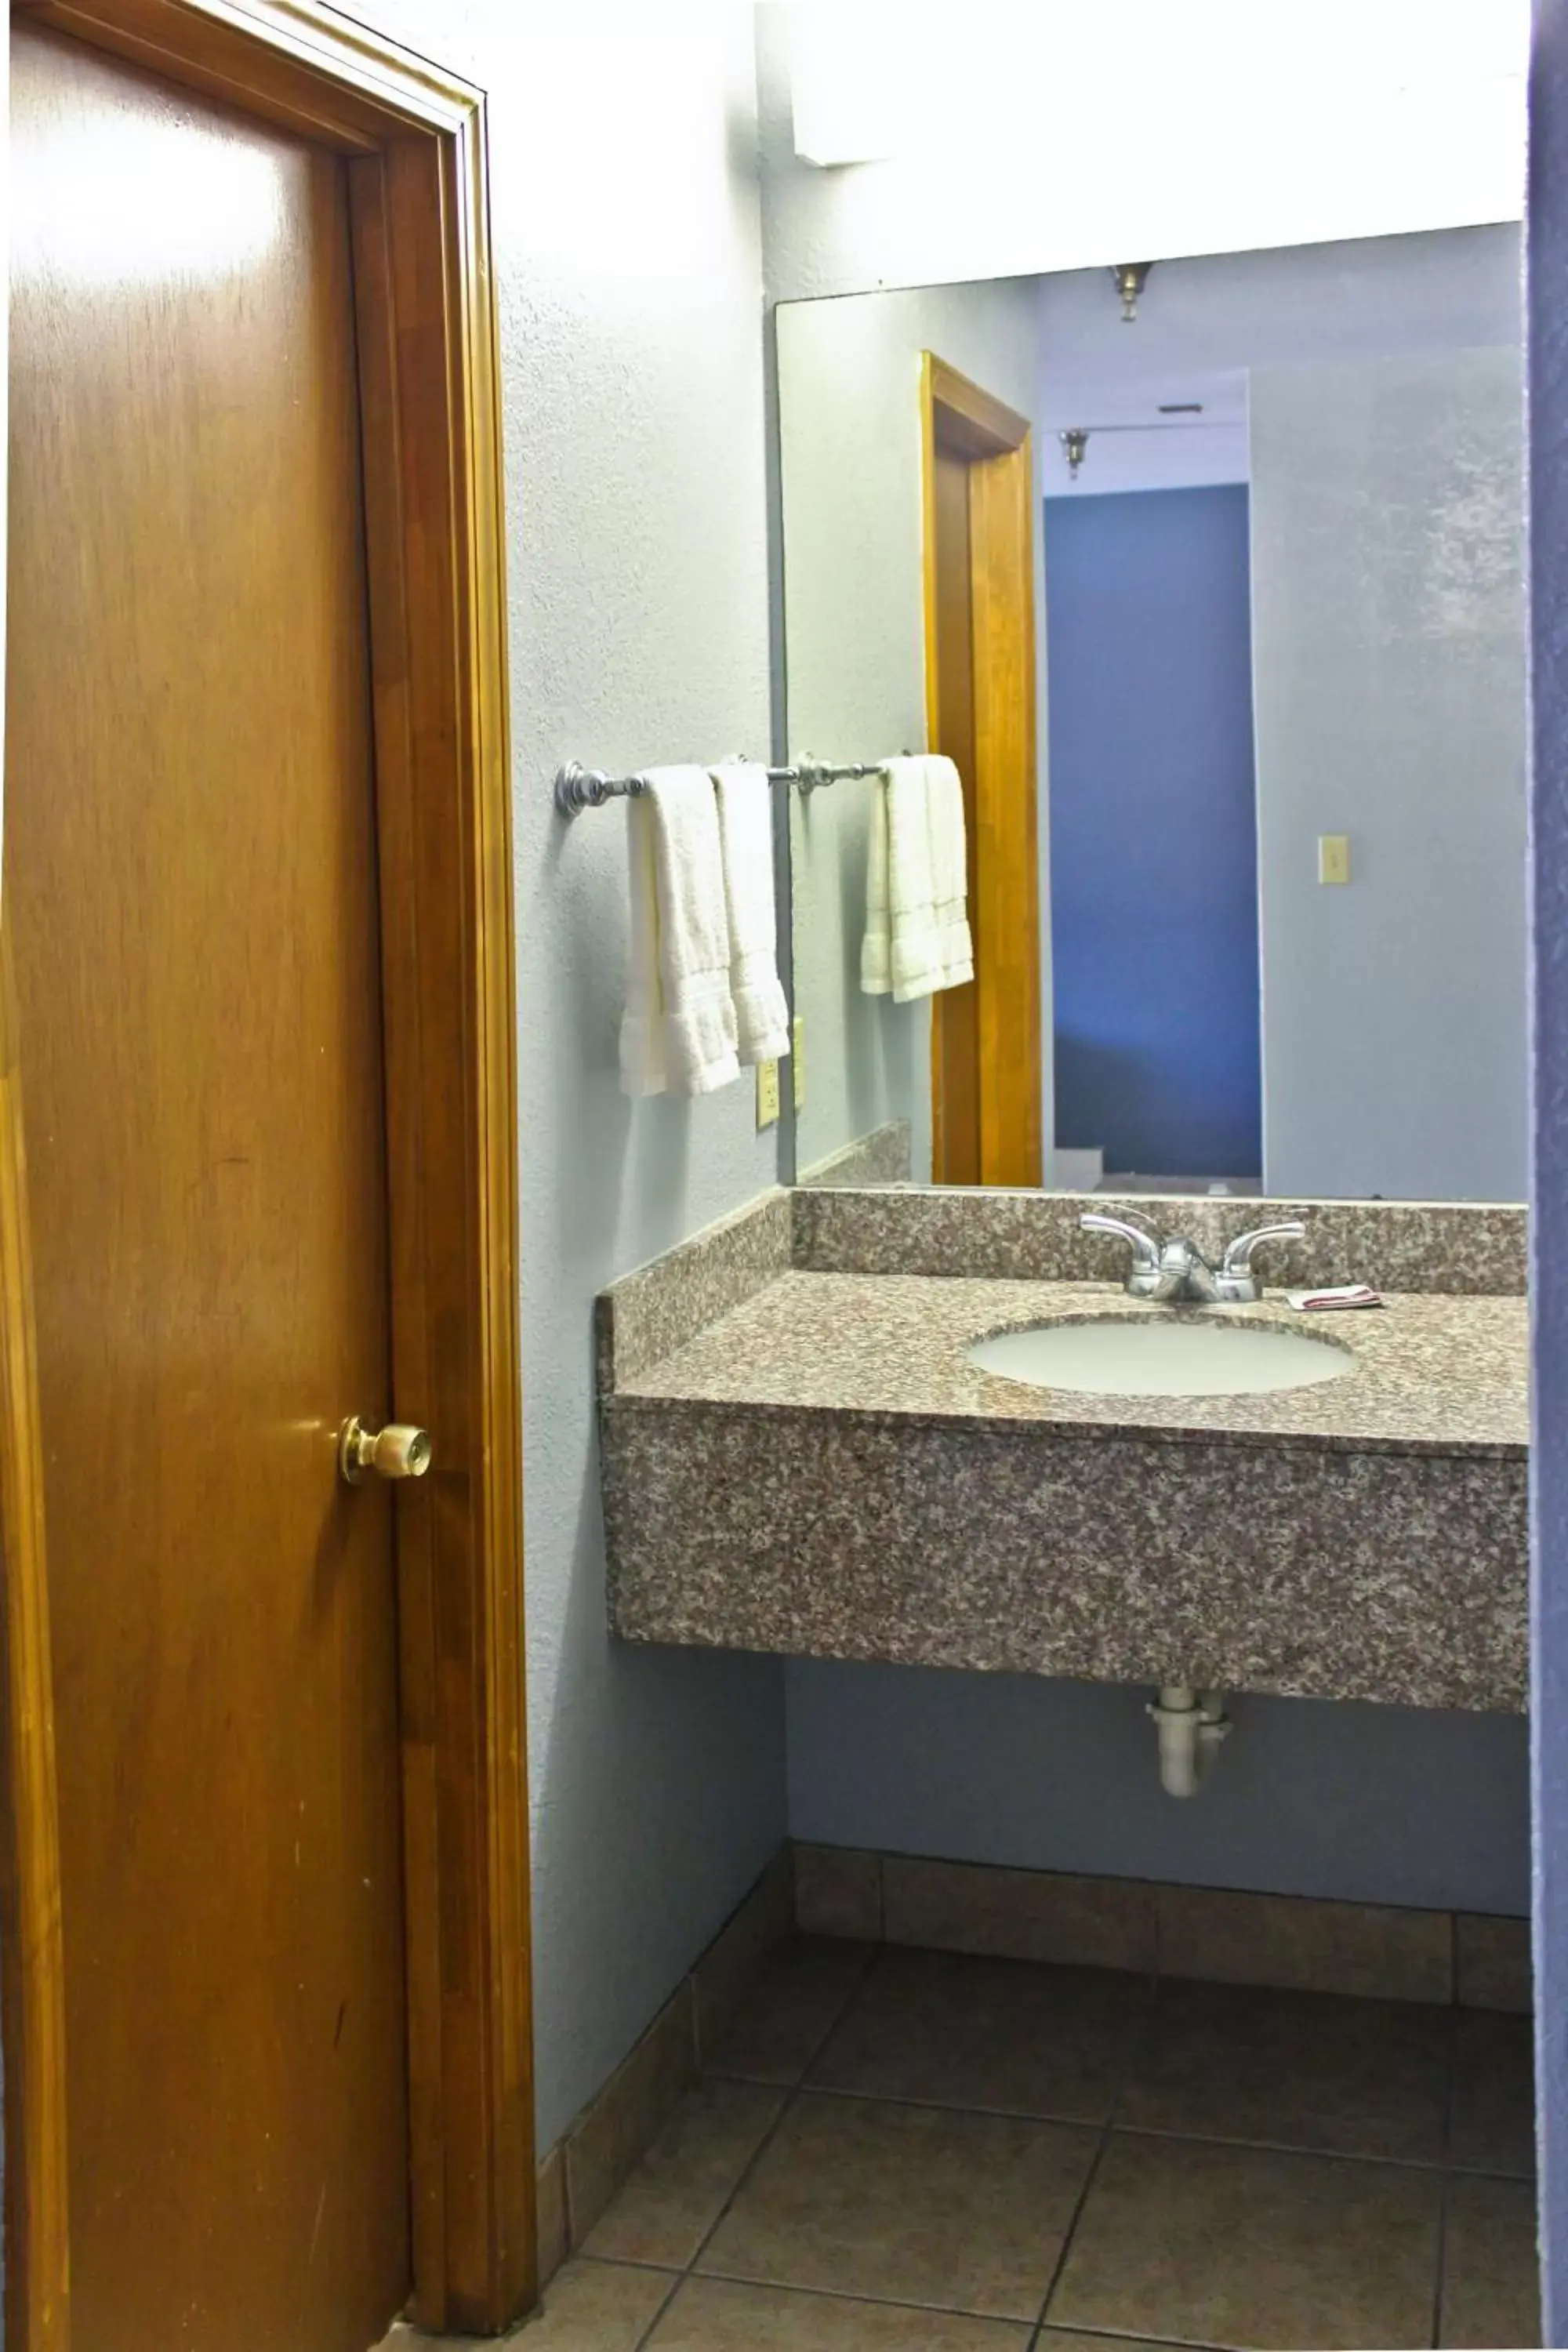 Area and facilities, Bathroom in The Shades Motel